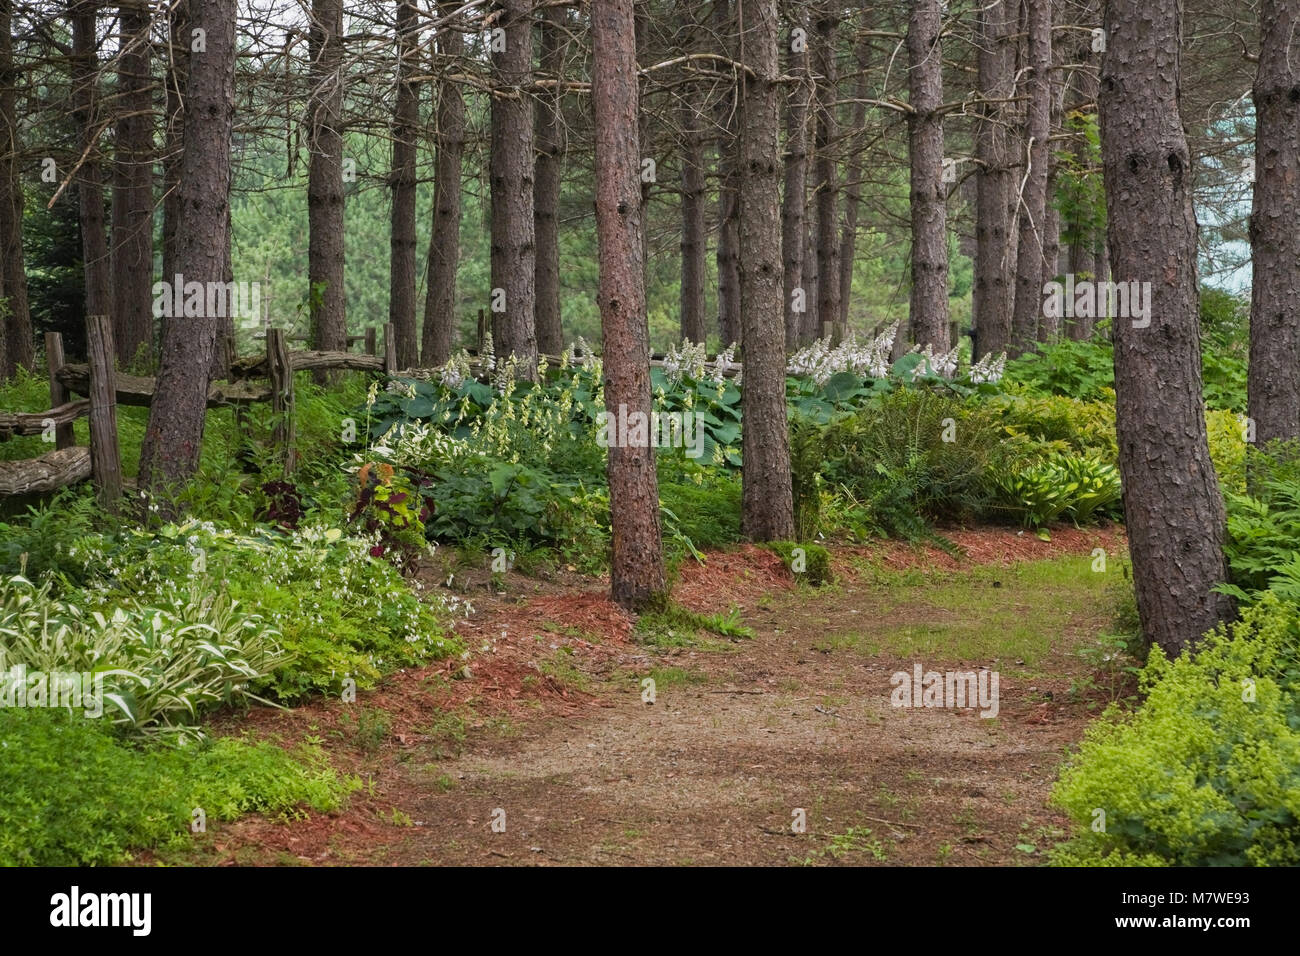 Walking path through forest of pine trees in a landscaped residential backyard garden in summer. Stock Photo